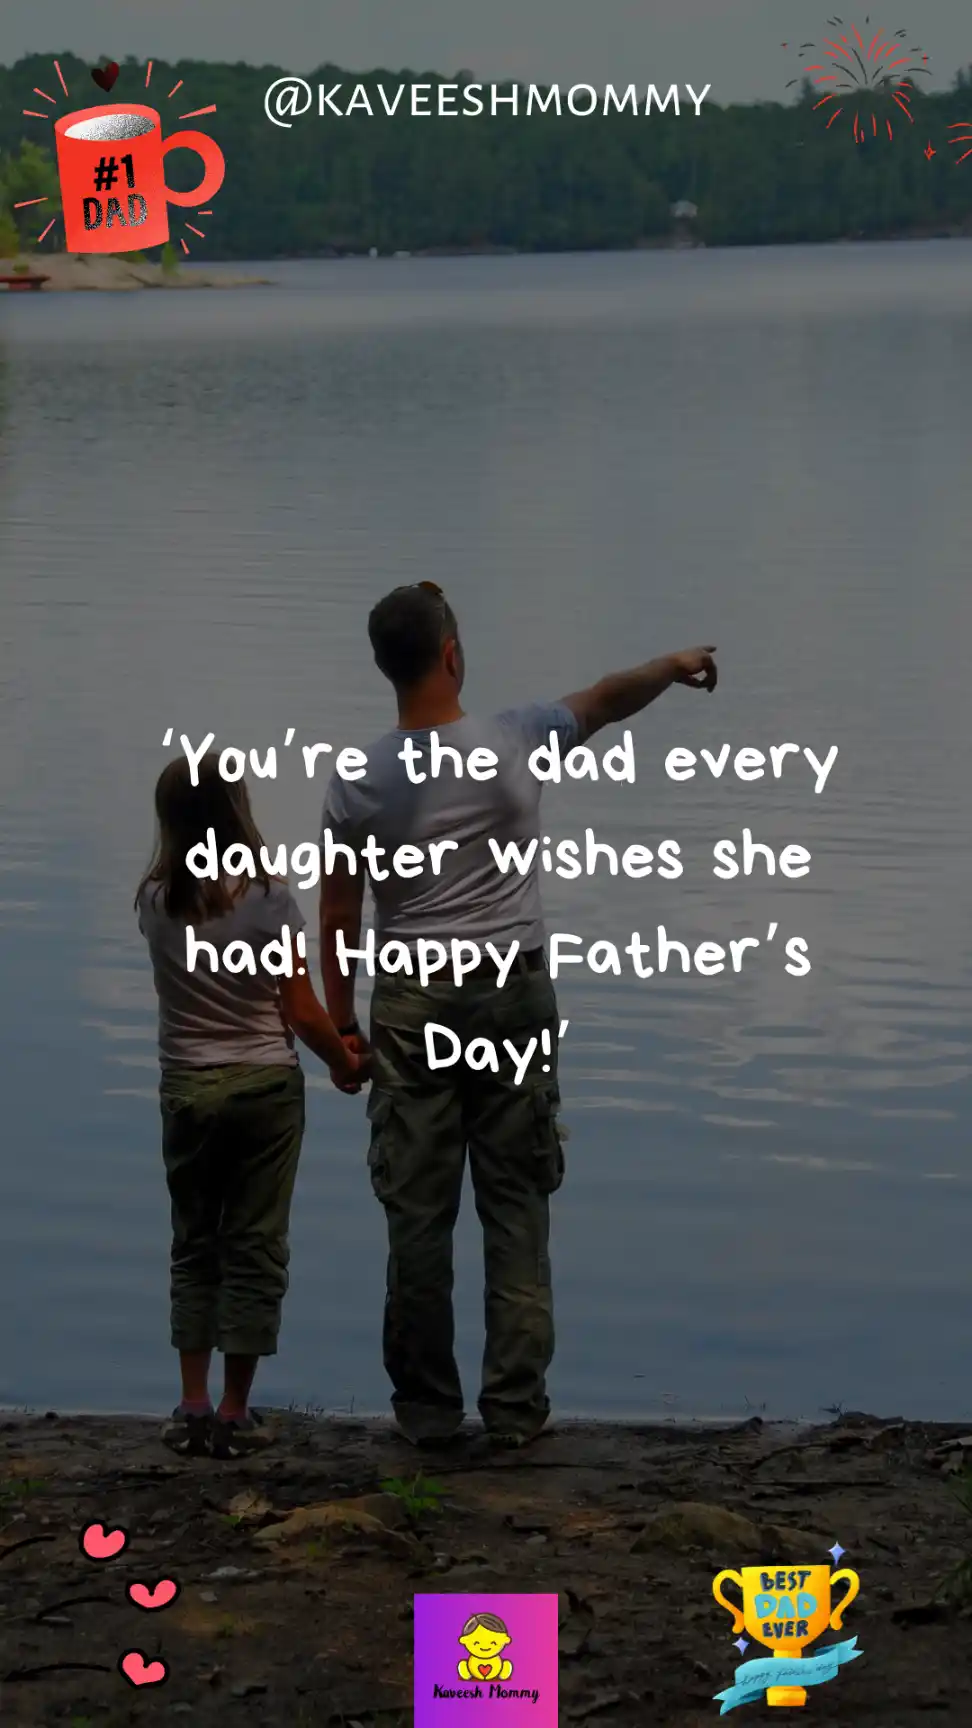 poem for father's day from daughter-‘You’re the dad every daughter wishes she had! Happy Father’s Day!’